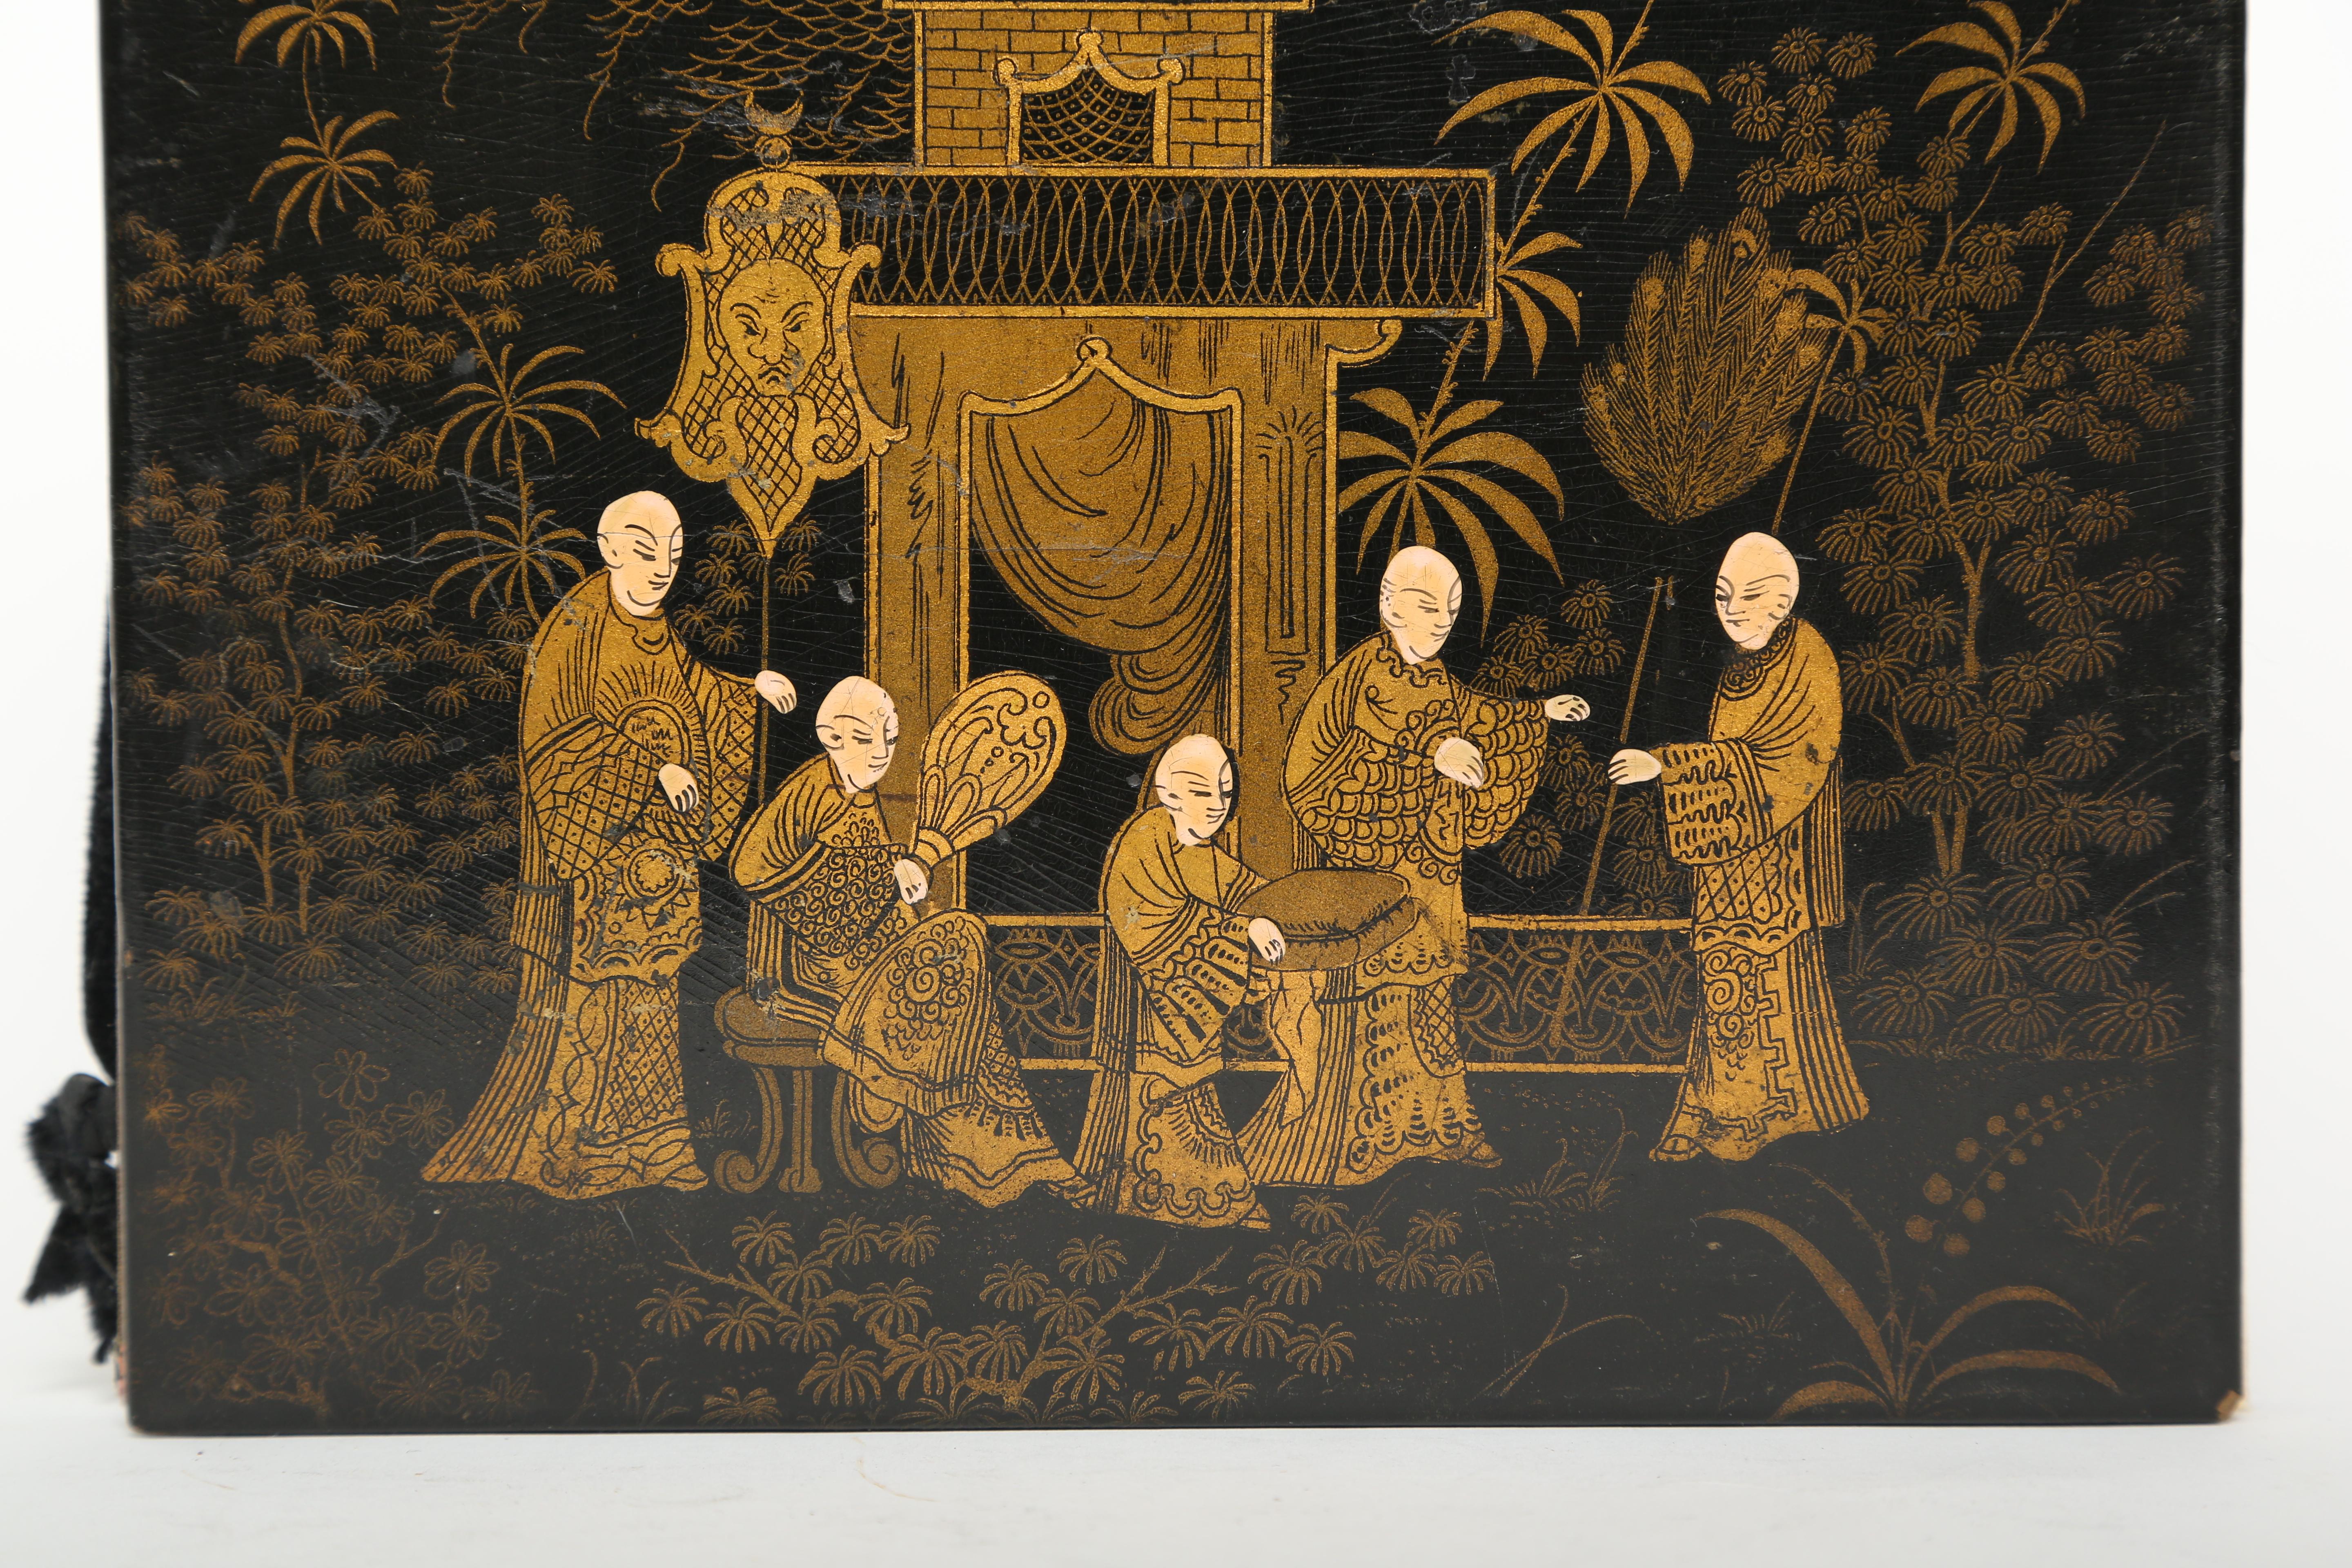 Antique folio or blotter in black lacquer on papier mâché. The scene depicts five Chinese men standing in front of a pagoda with a background of trees and palm trees. One of the men is offering a cushion to the man on the right. The decoration is